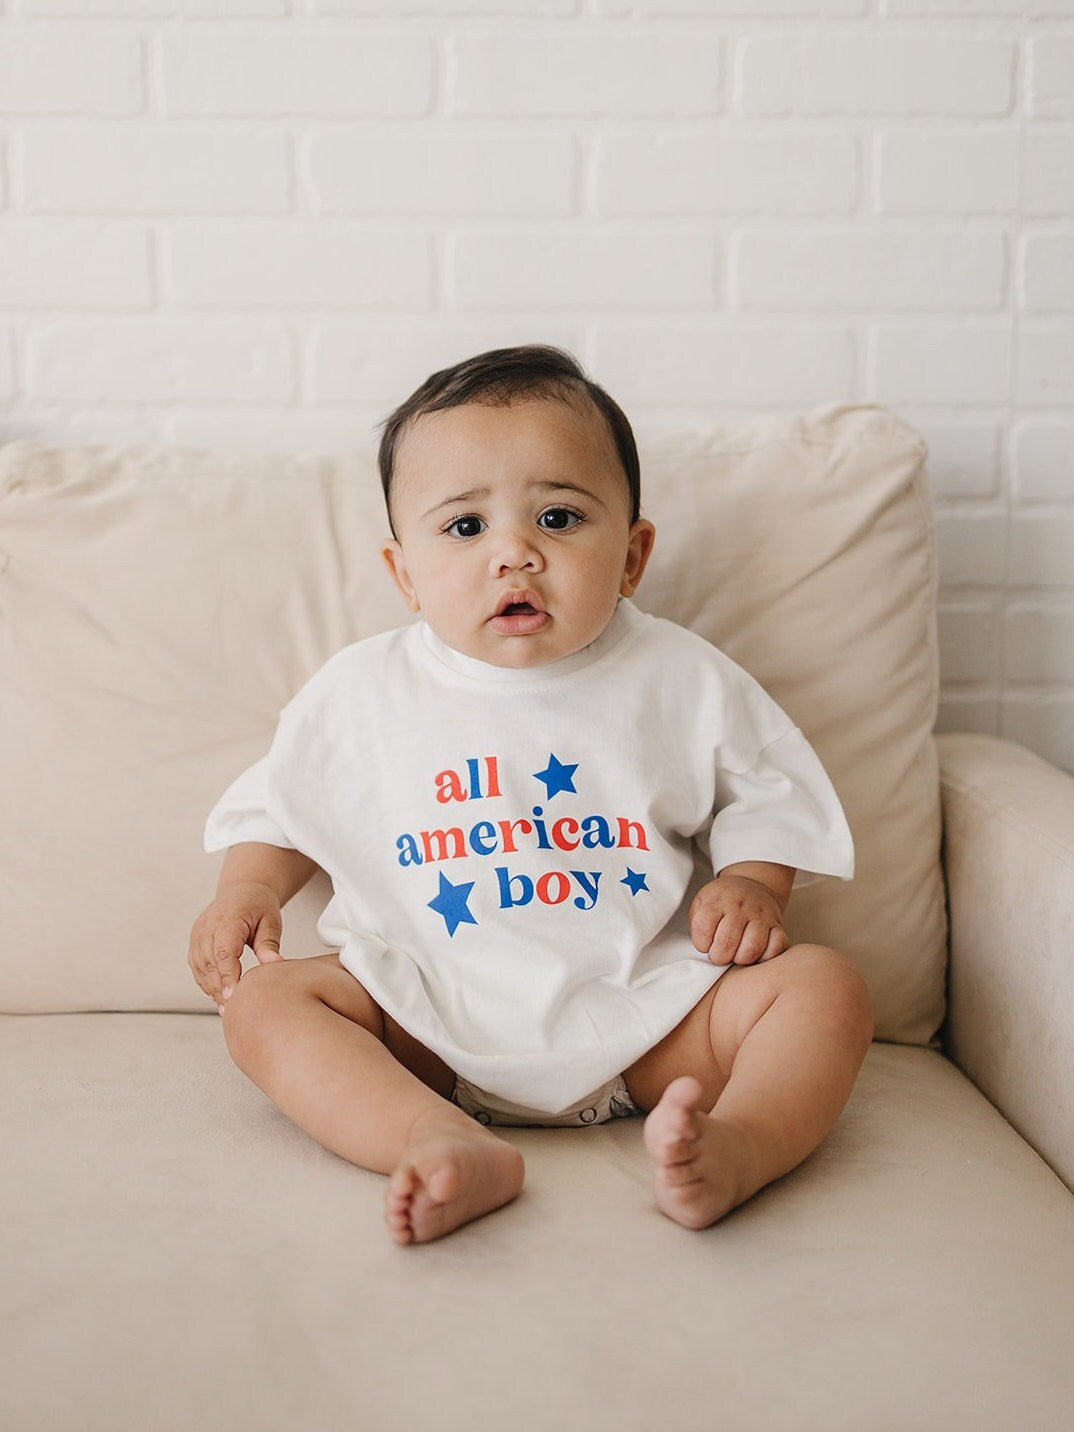 All American Boy Graphic Oversized T-Shirt Romper - Baby Boy Bubble Romper - 4th of July Outfit - Red, White & Blue Patriotic Shirt - USA